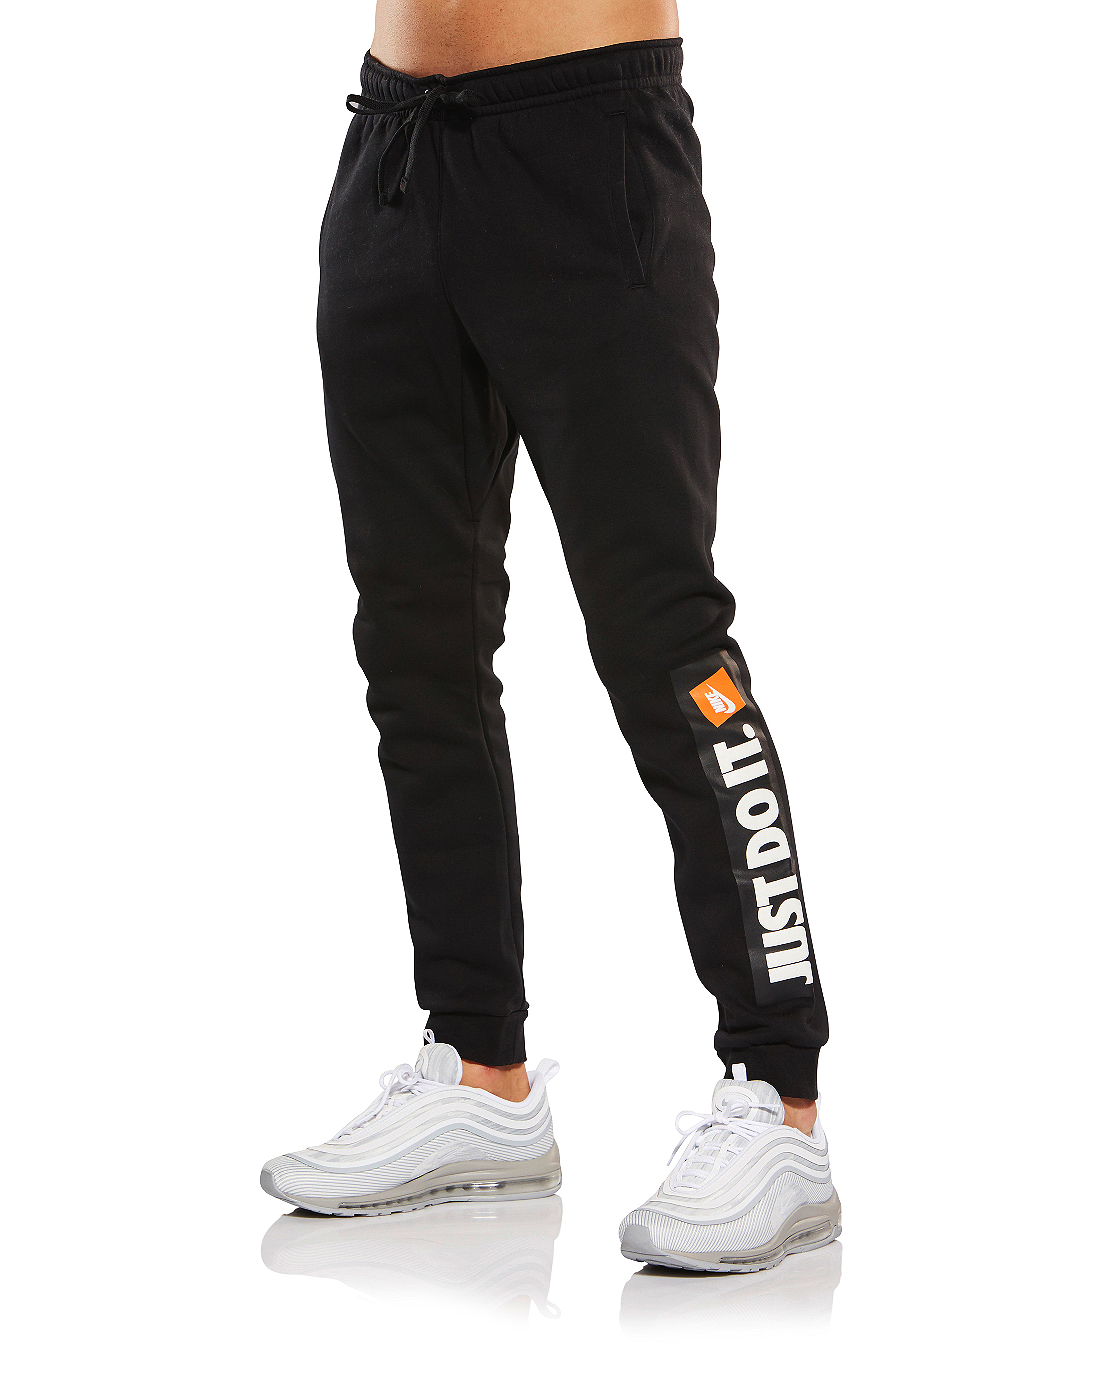 mens just do it joggers